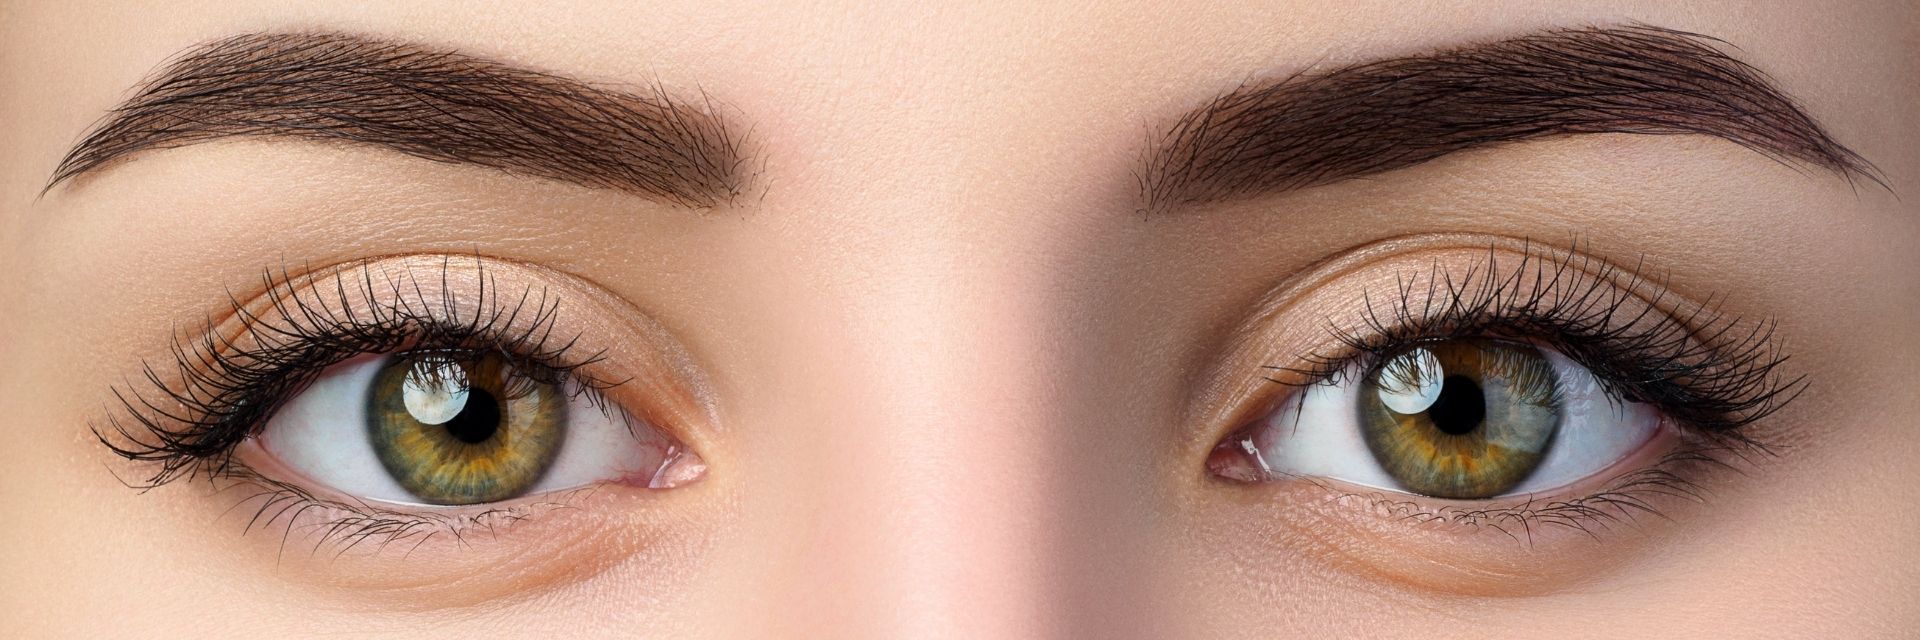 Woman’s eyes and eyebrows after getting brow lamination in Calgary.